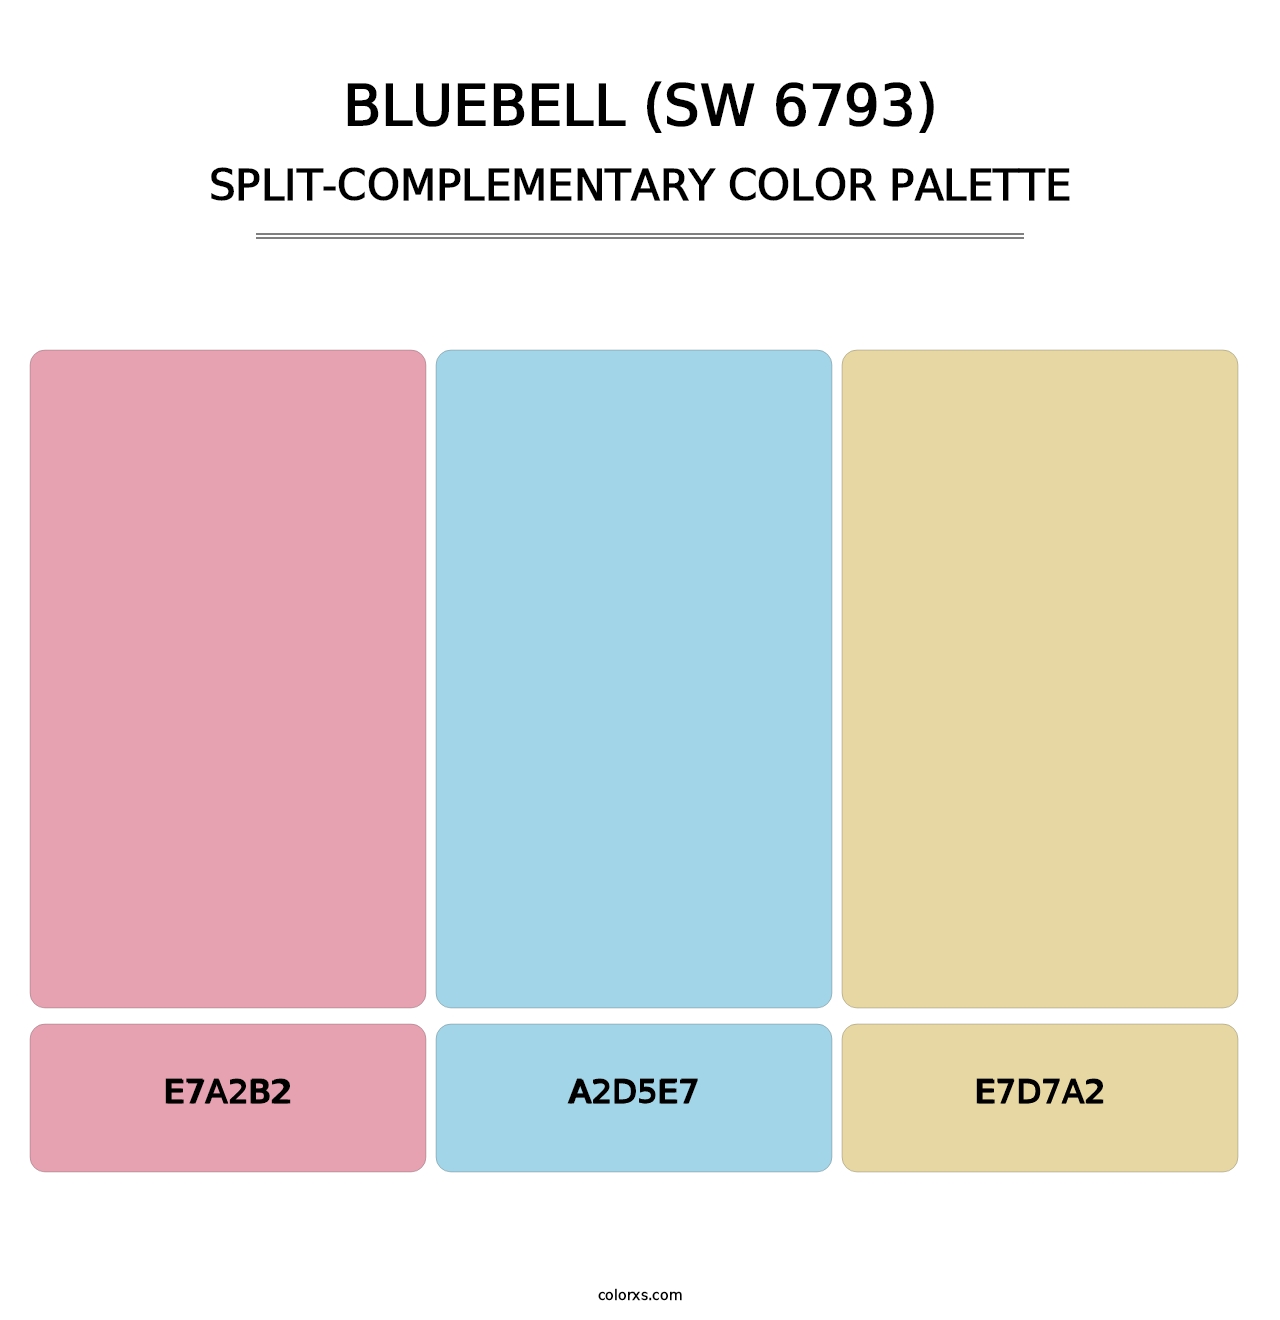 Bluebell (SW 6793) - Split-Complementary Color Palette